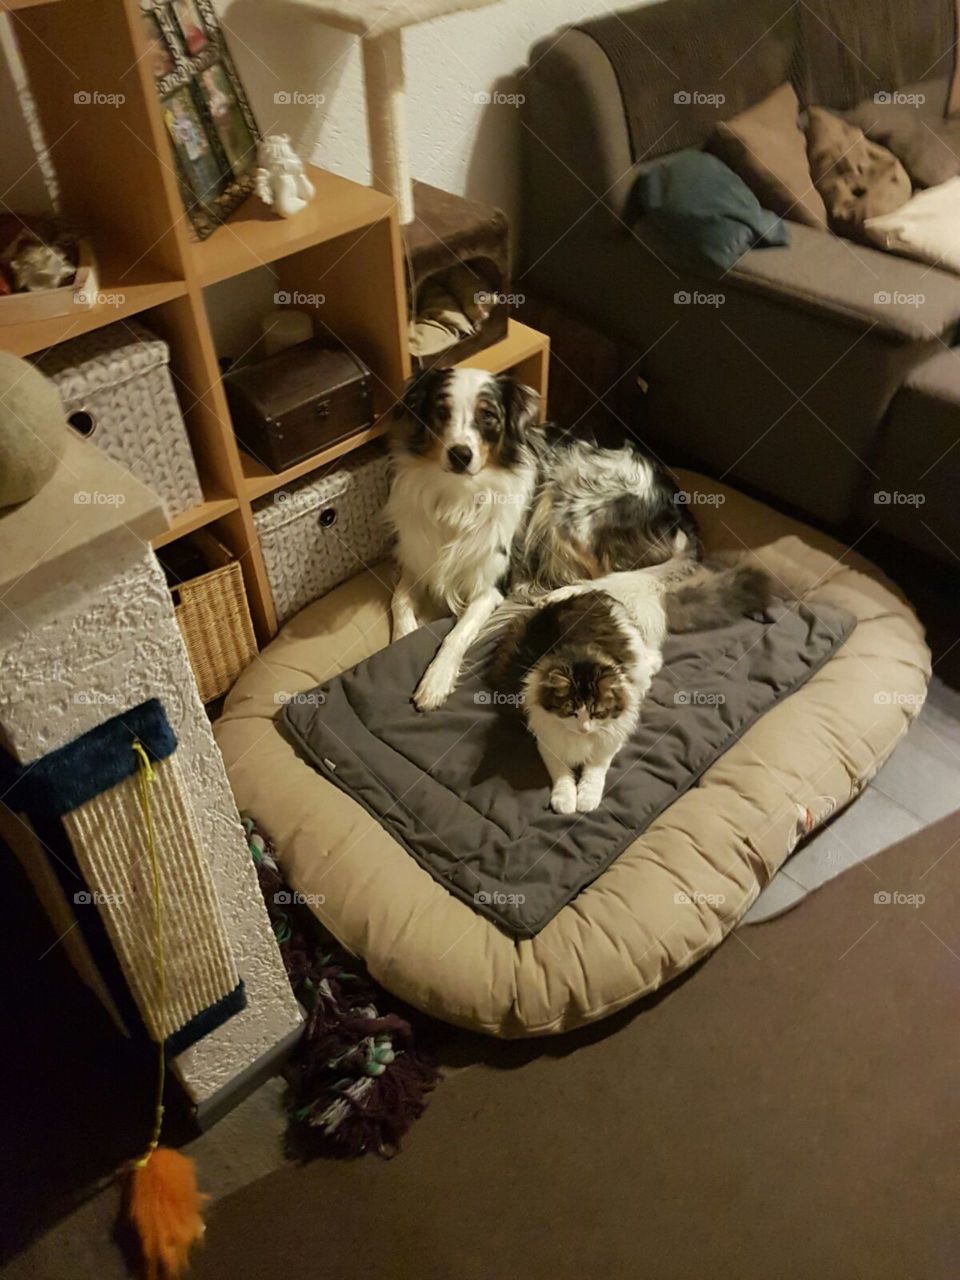 They share a bed